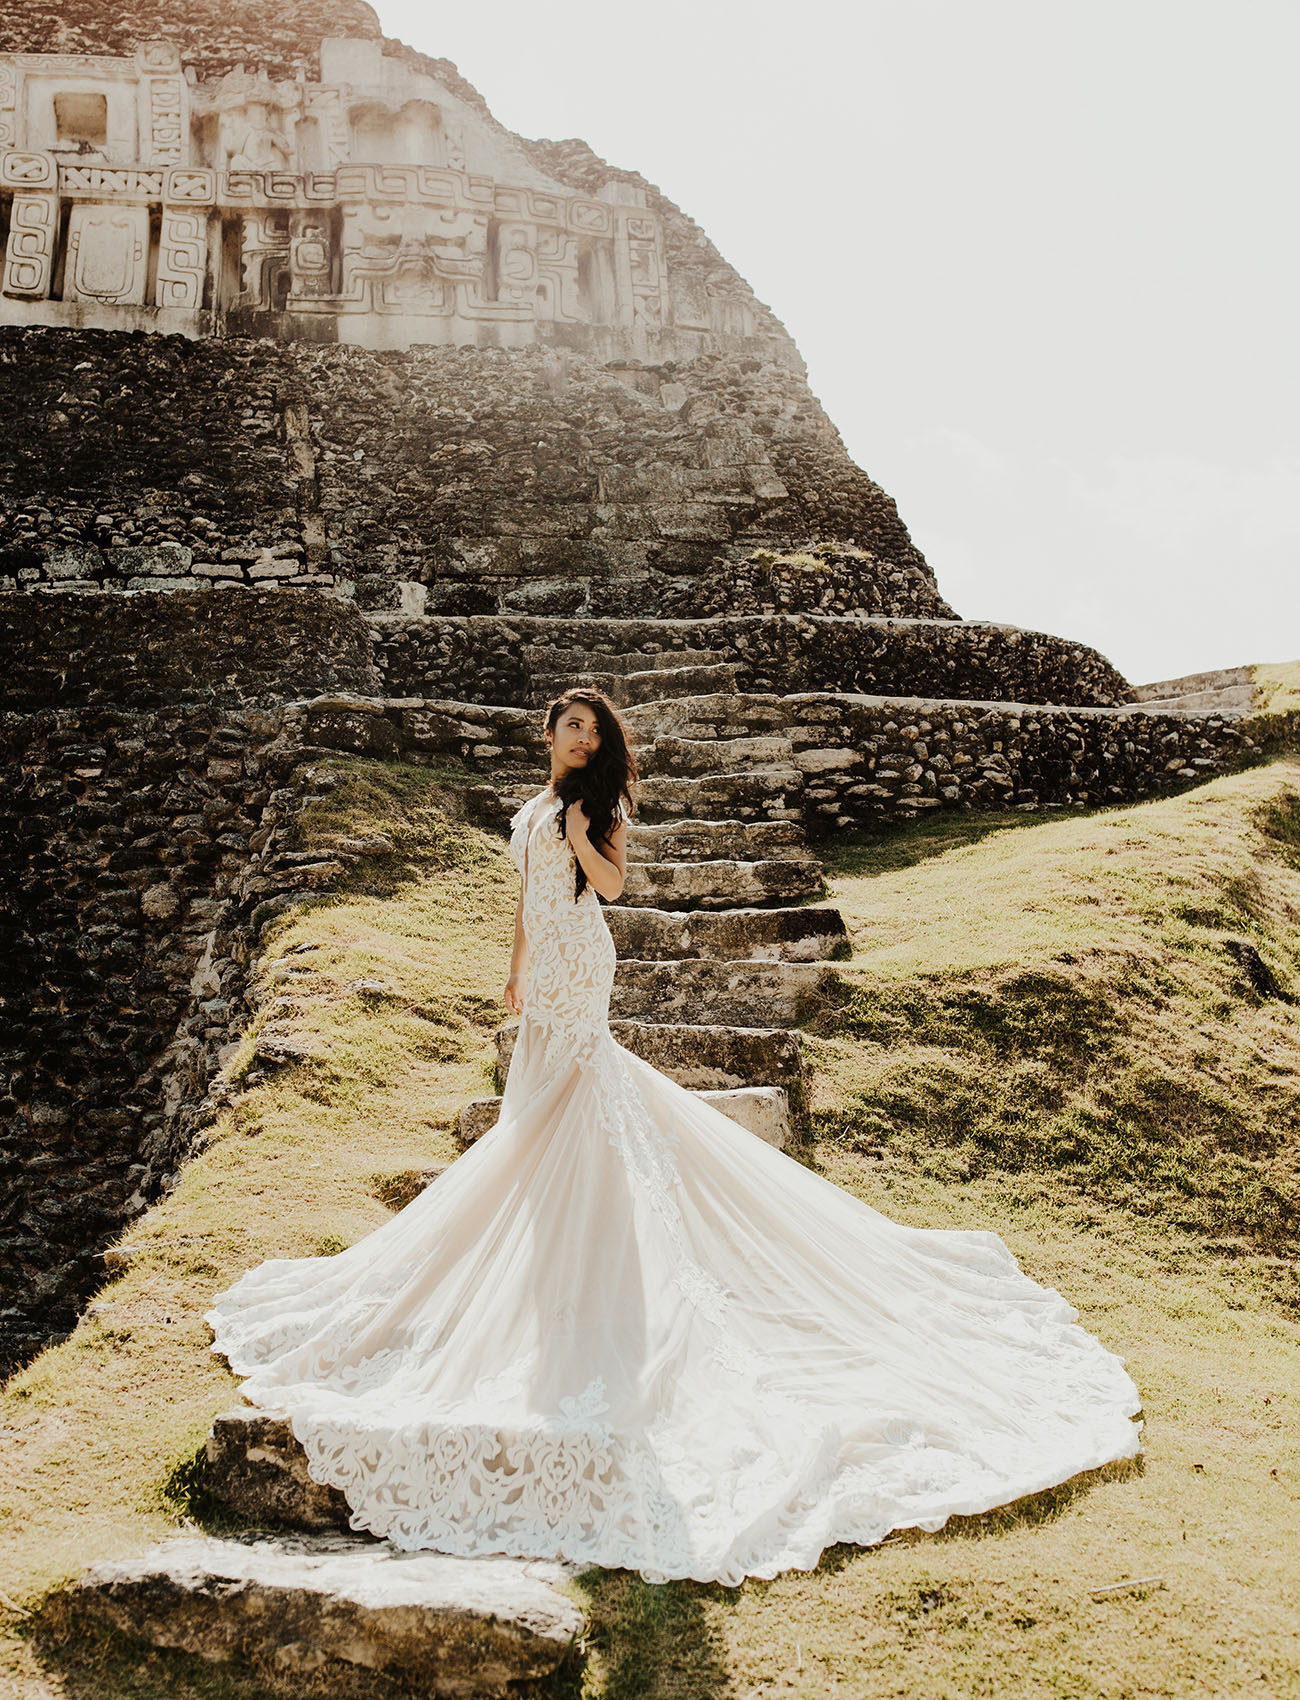 This destination wedding took place in Belize, in the ruins of an ancient Mayan temple